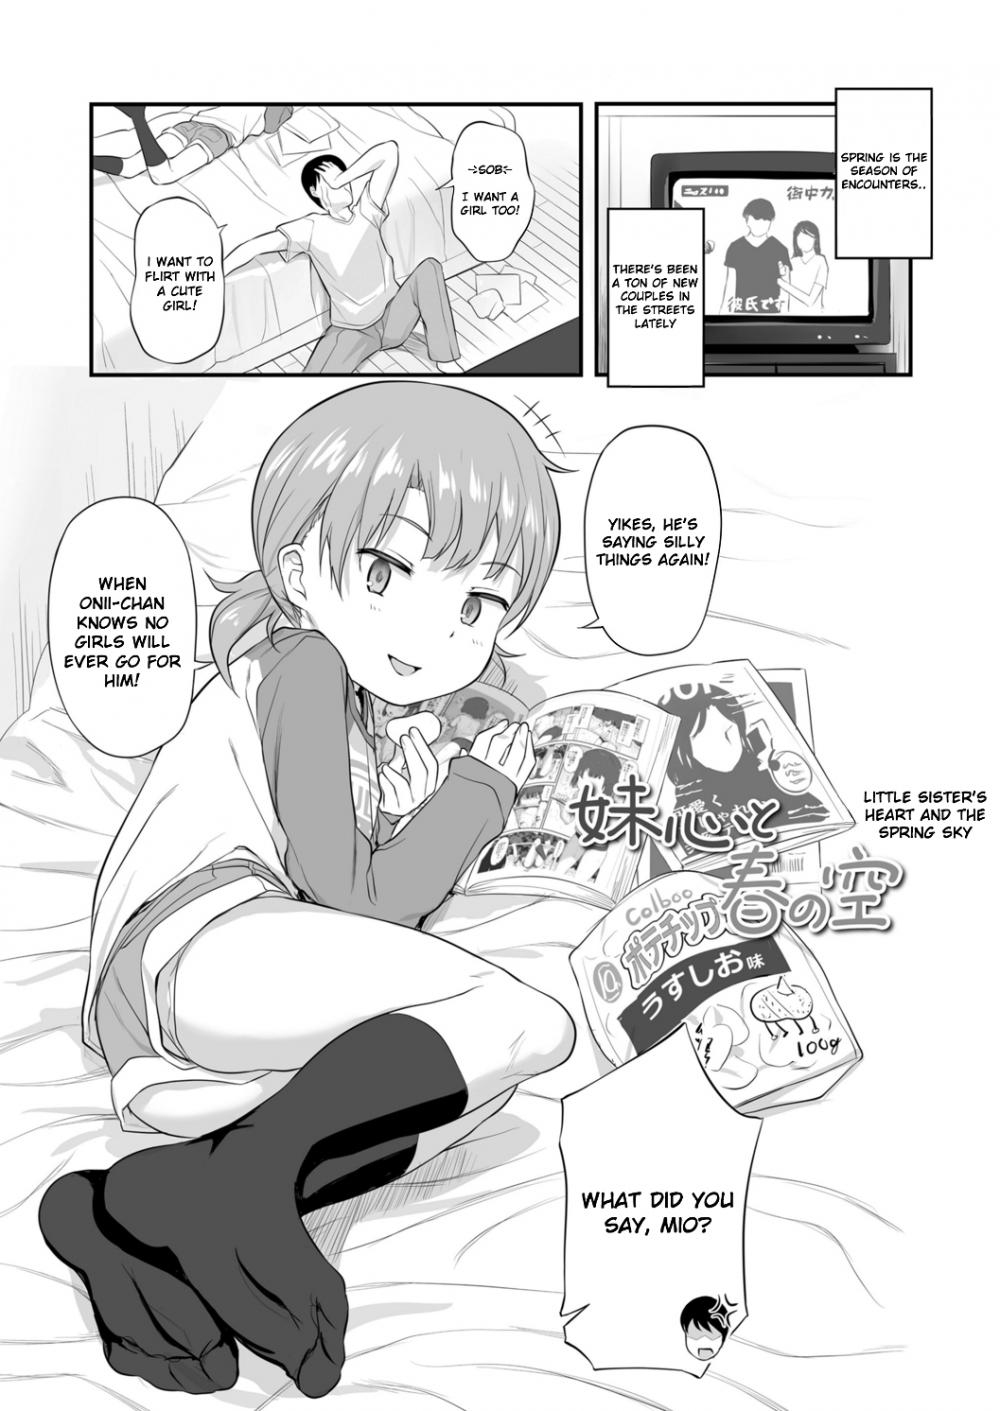 Hentai Manga Comic-What Kind of Weirdo Onii-chan Gets Excited From Seeing His Little Sister Naked?-Chapter 7-1